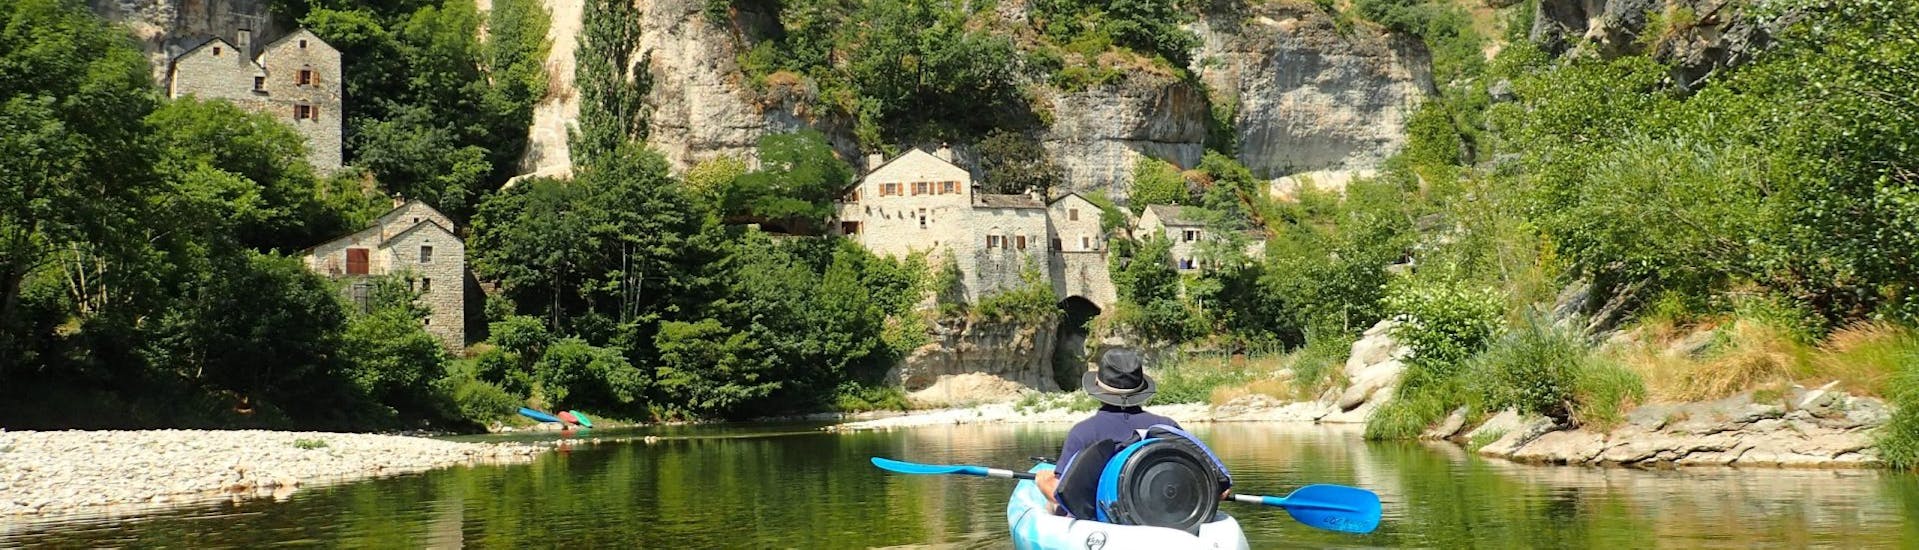 Canoes and kayaks on water during the Lo Canoë's 2 Day Kayak & Canoe Hire from Castelbouc to Baumes Basses - 29km.